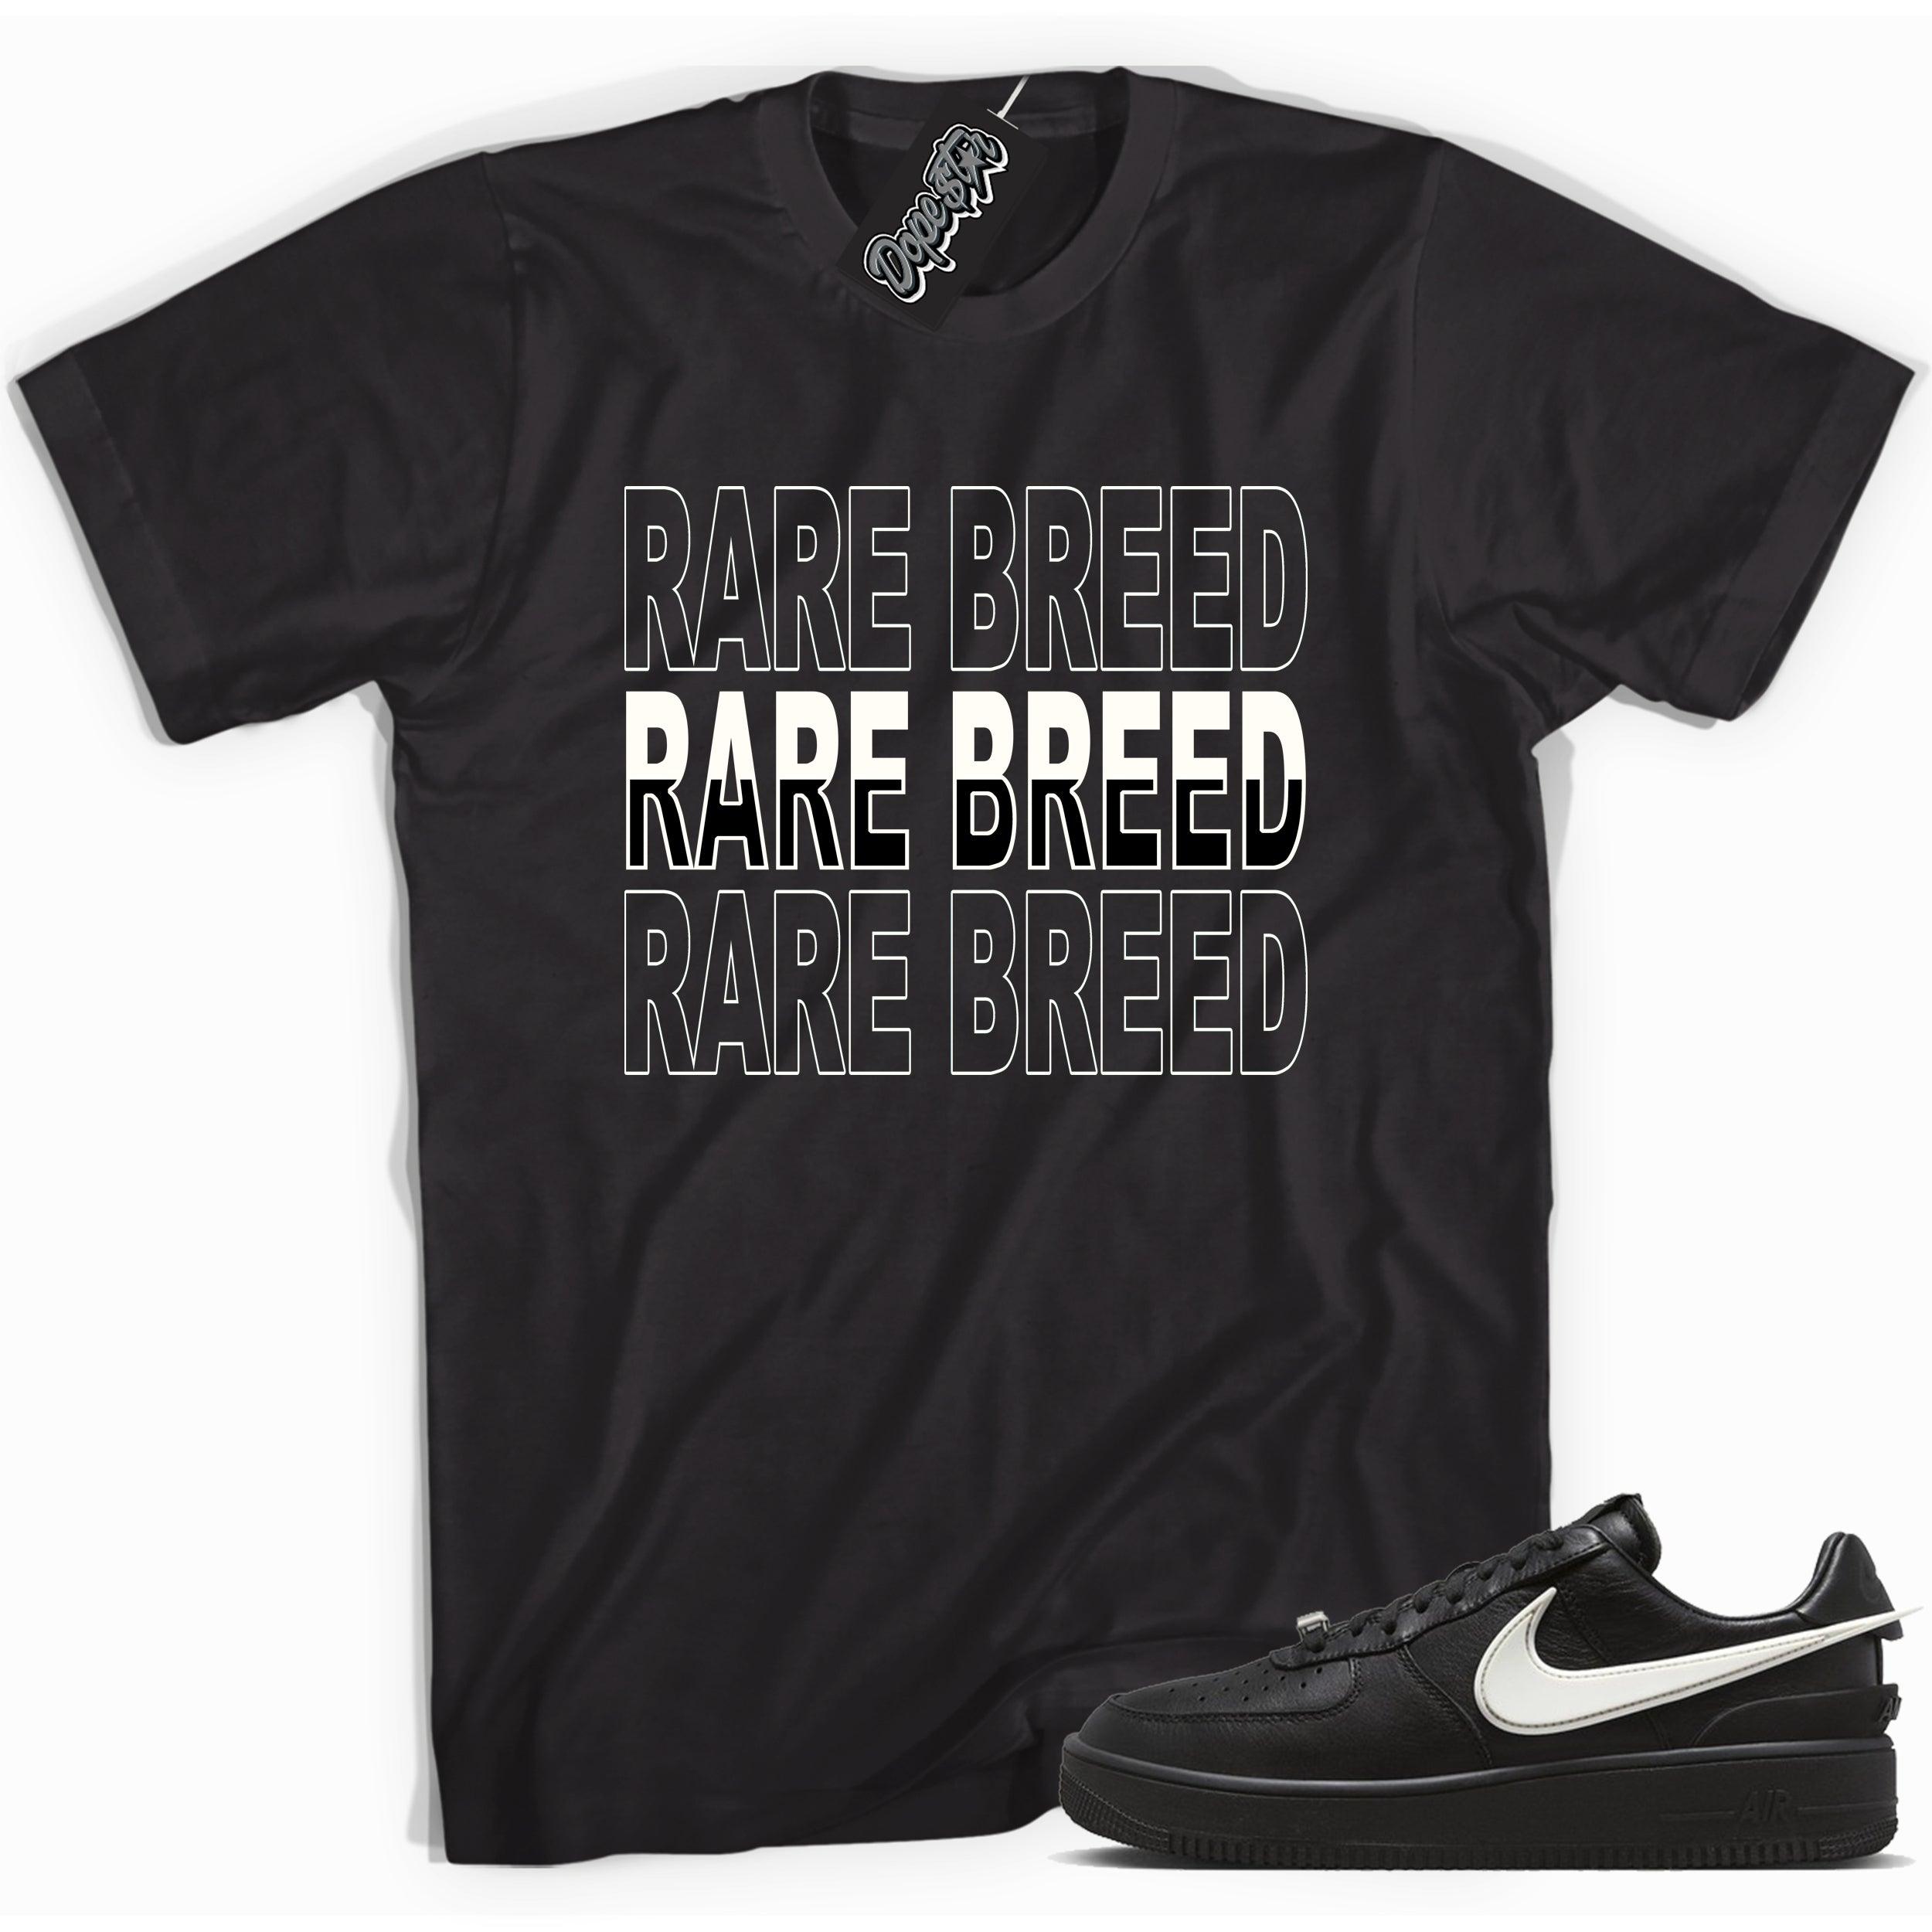 Cool black graphic tee with 'rare breed' print, that perfectly matches Nike Air Force 1 Low SP Ambush Phantom sneakers.